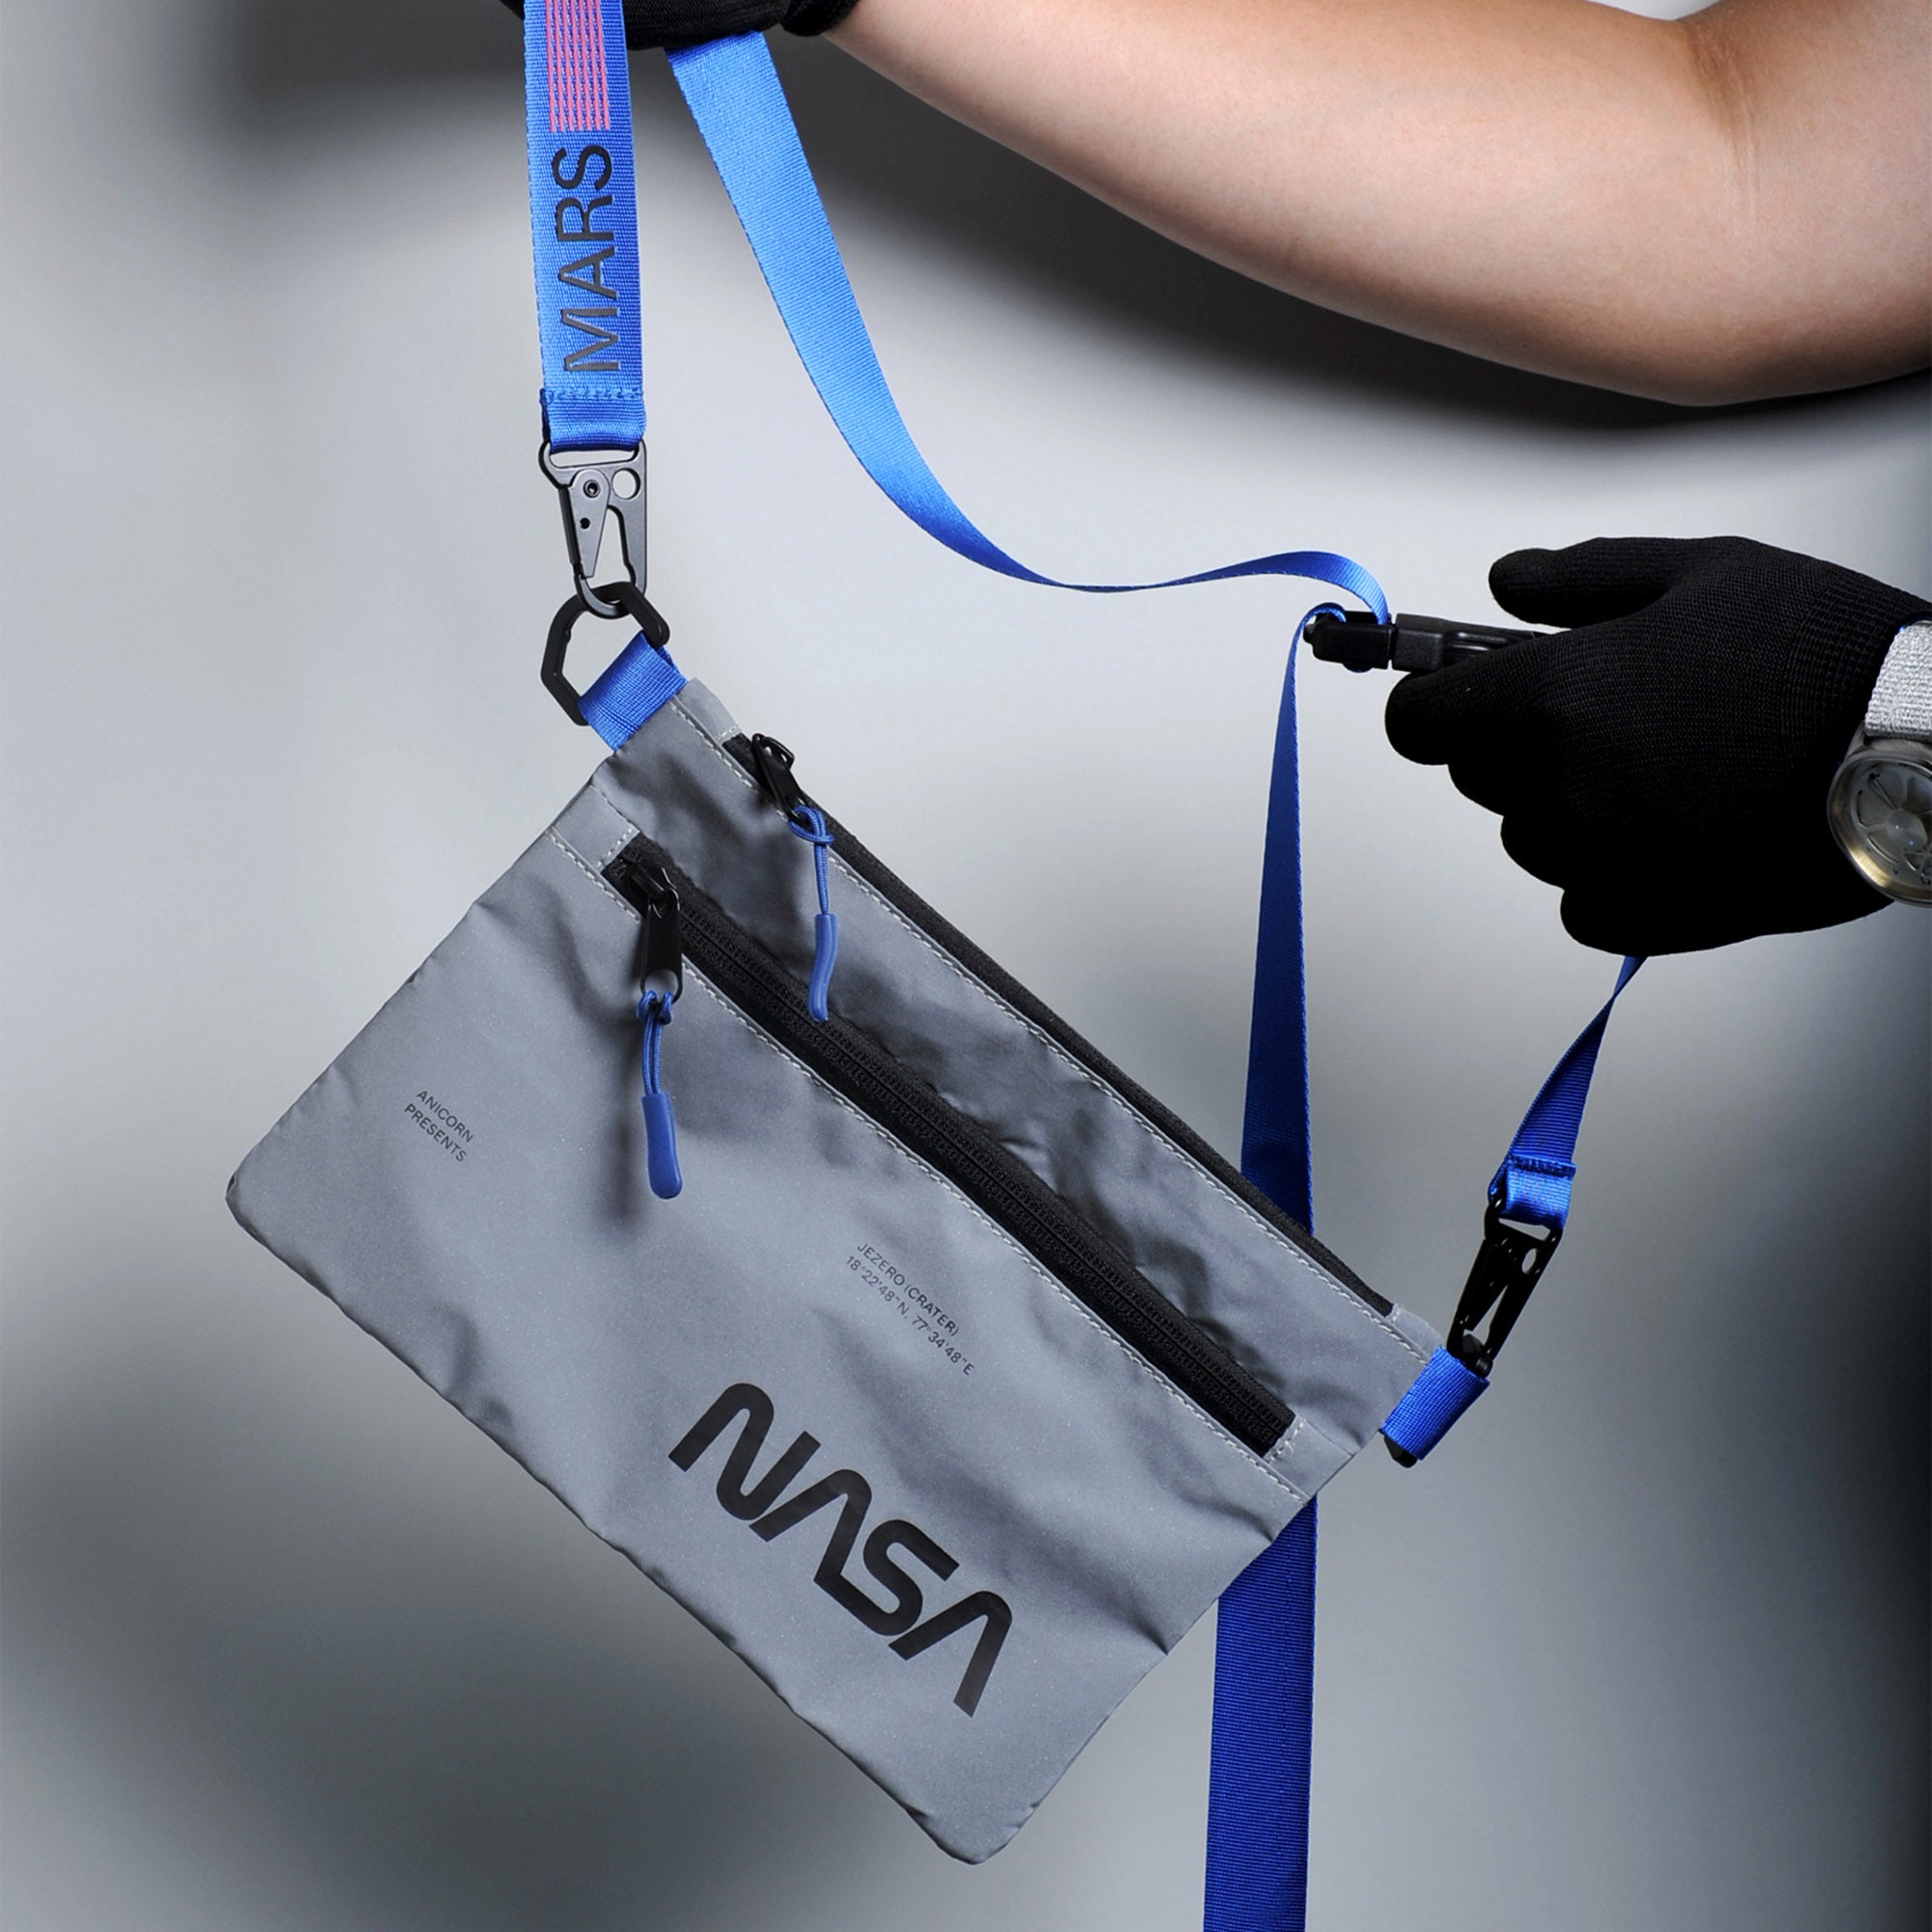 NASA astronautical wear inspired messenger bag made with reflective and waterproof textile. A collaboration with Elephat Urban Equipment.